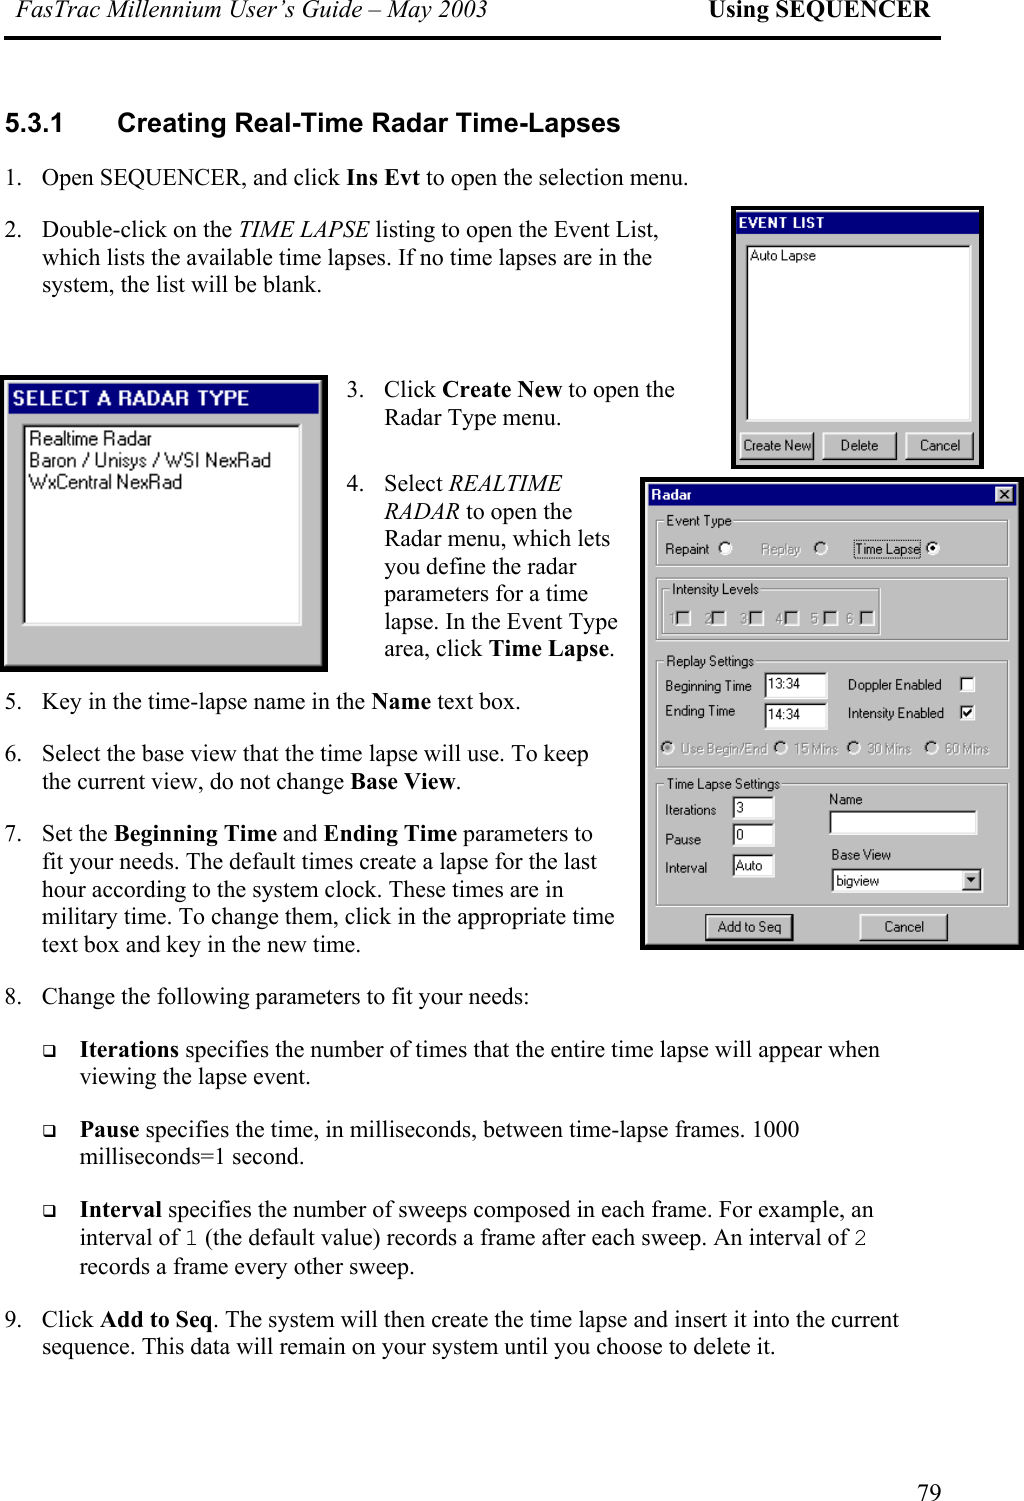 FasTrac Millennium User’s Guide – May 2003 Using SEQUENCER 5.3.1 Creating Real-Time Radar Time-Lapses 1.  Open SEQUENCER, and click Ins Evt to open the selection menu.  2. Double-click on the TIME LAPSE listing to open the Event List, which lists the available time lapses. If no time lapses are in the system, the list will be blank.  w time. 3. Click Create New to open the Radar Type menu. 4. Select REALTIME RADAR to open the Radar menu, which lets you define the radar parameters for a time lapse. In the Event Type area, click Time Lapse.  5.  Key in the time-lapse name in the Name text box. 6.  Select the base view that the time lapse will use. To keep the current view, do not change Base View.  7. Set the Beginning Time and Ending Time parameters to fit your needs. The default times create a lapse for the last hour according to the system clock. These times are in military time. To change them, click in the appropriate time text box and key in the ne8.  Change the following parameters to fit your needs:   Iterations specifies the number of times that the entire time lapse will appear when viewing the lapse event.   Pause specifies the time, in milliseconds, between time-lapse frames. 1000 milliseconds=1 second.    Interval specifies the number of sweeps composed in each frame. For example, an interval of 1 (the default value) records a frame after each sweep. An interval of 2 records a frame every other sweep. 9. Click Add to Seq. The system will then create the time lapse and insert it into the current sequence. This data will remain on your system until you choose to delete it. 79 